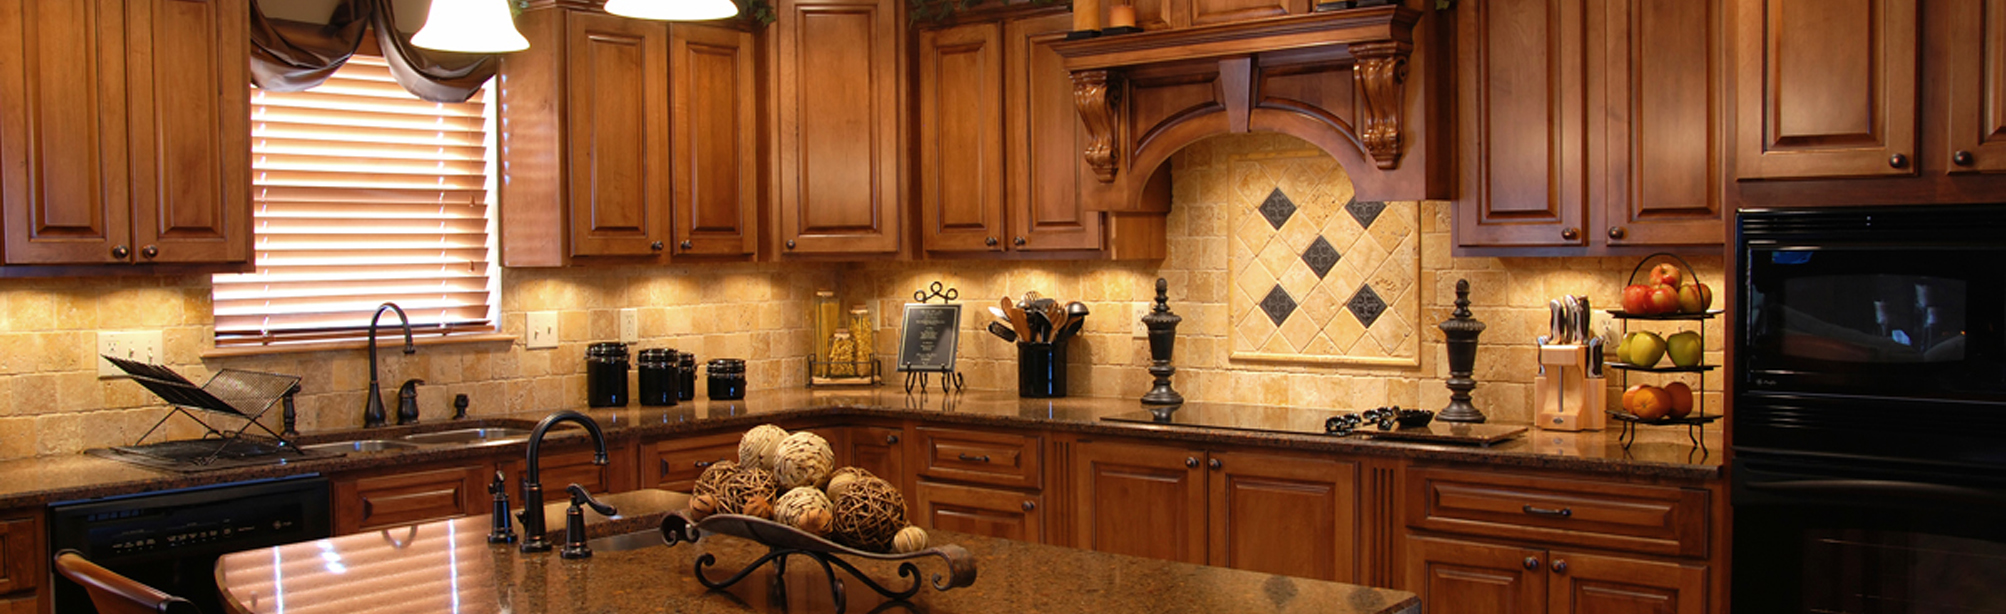 Traditional-Kitchen-Remodeling-brown-cab